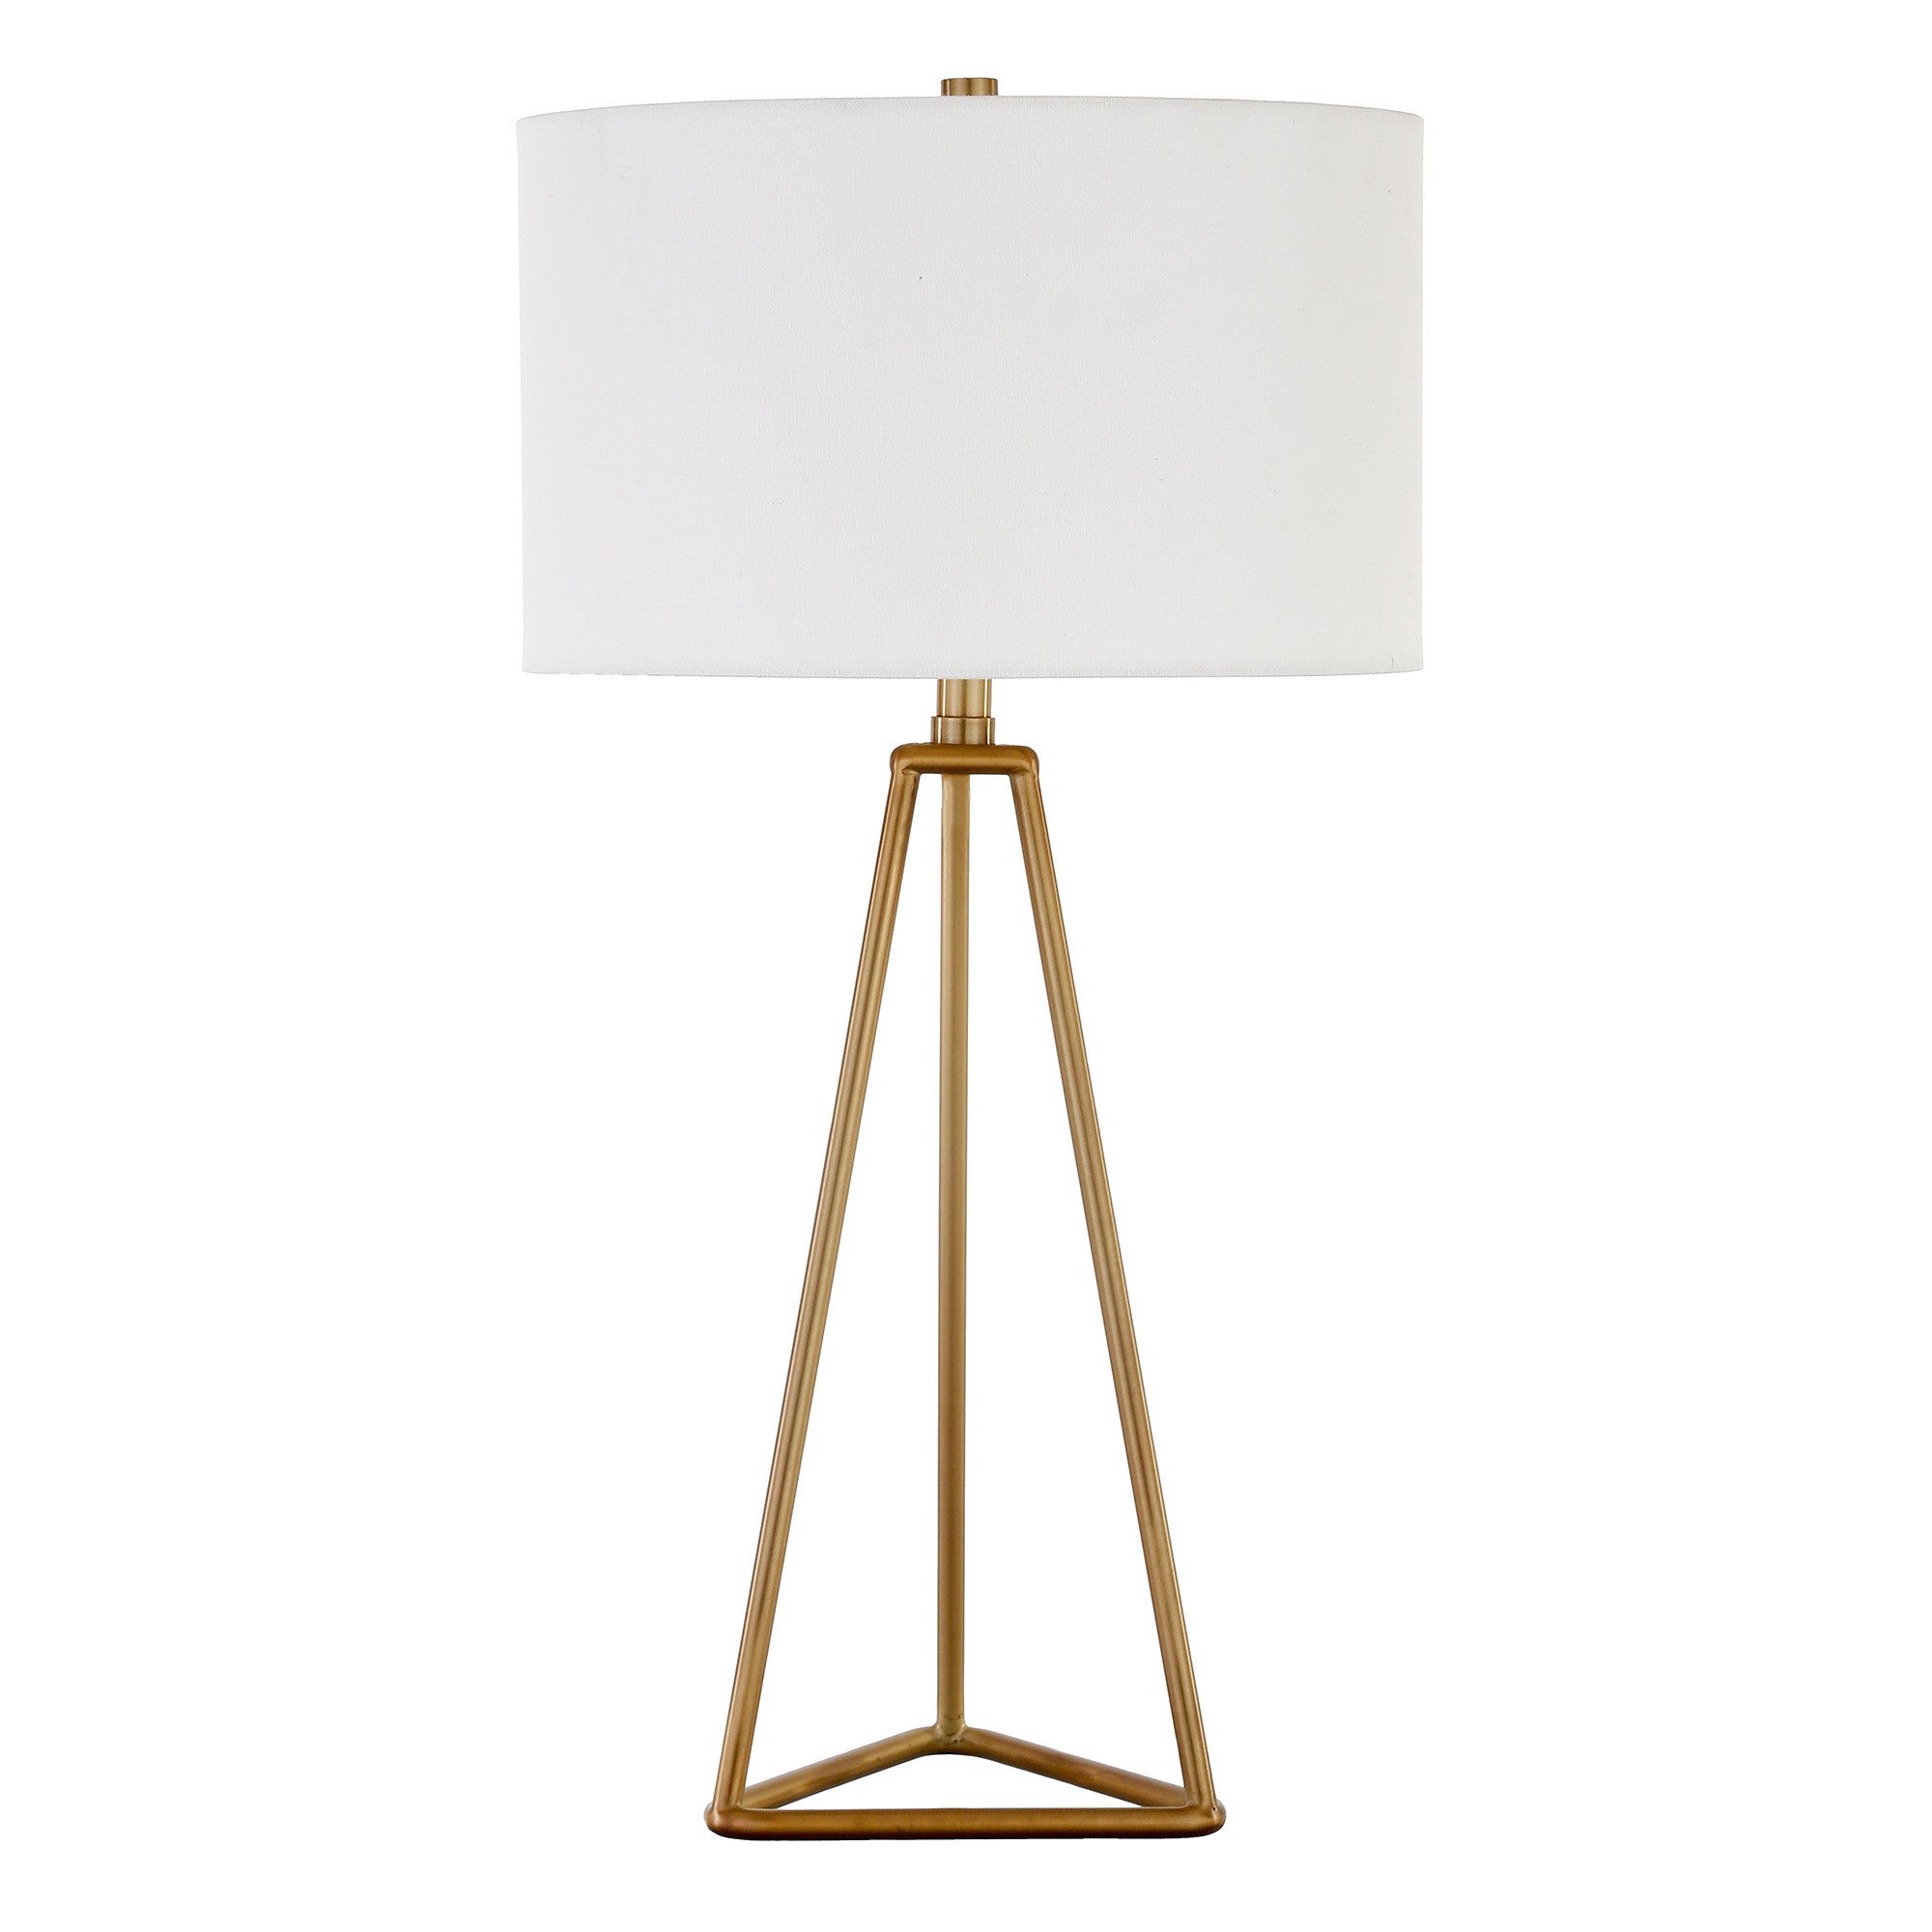 26" Gold Metal Table Lamp With White Drum Shade